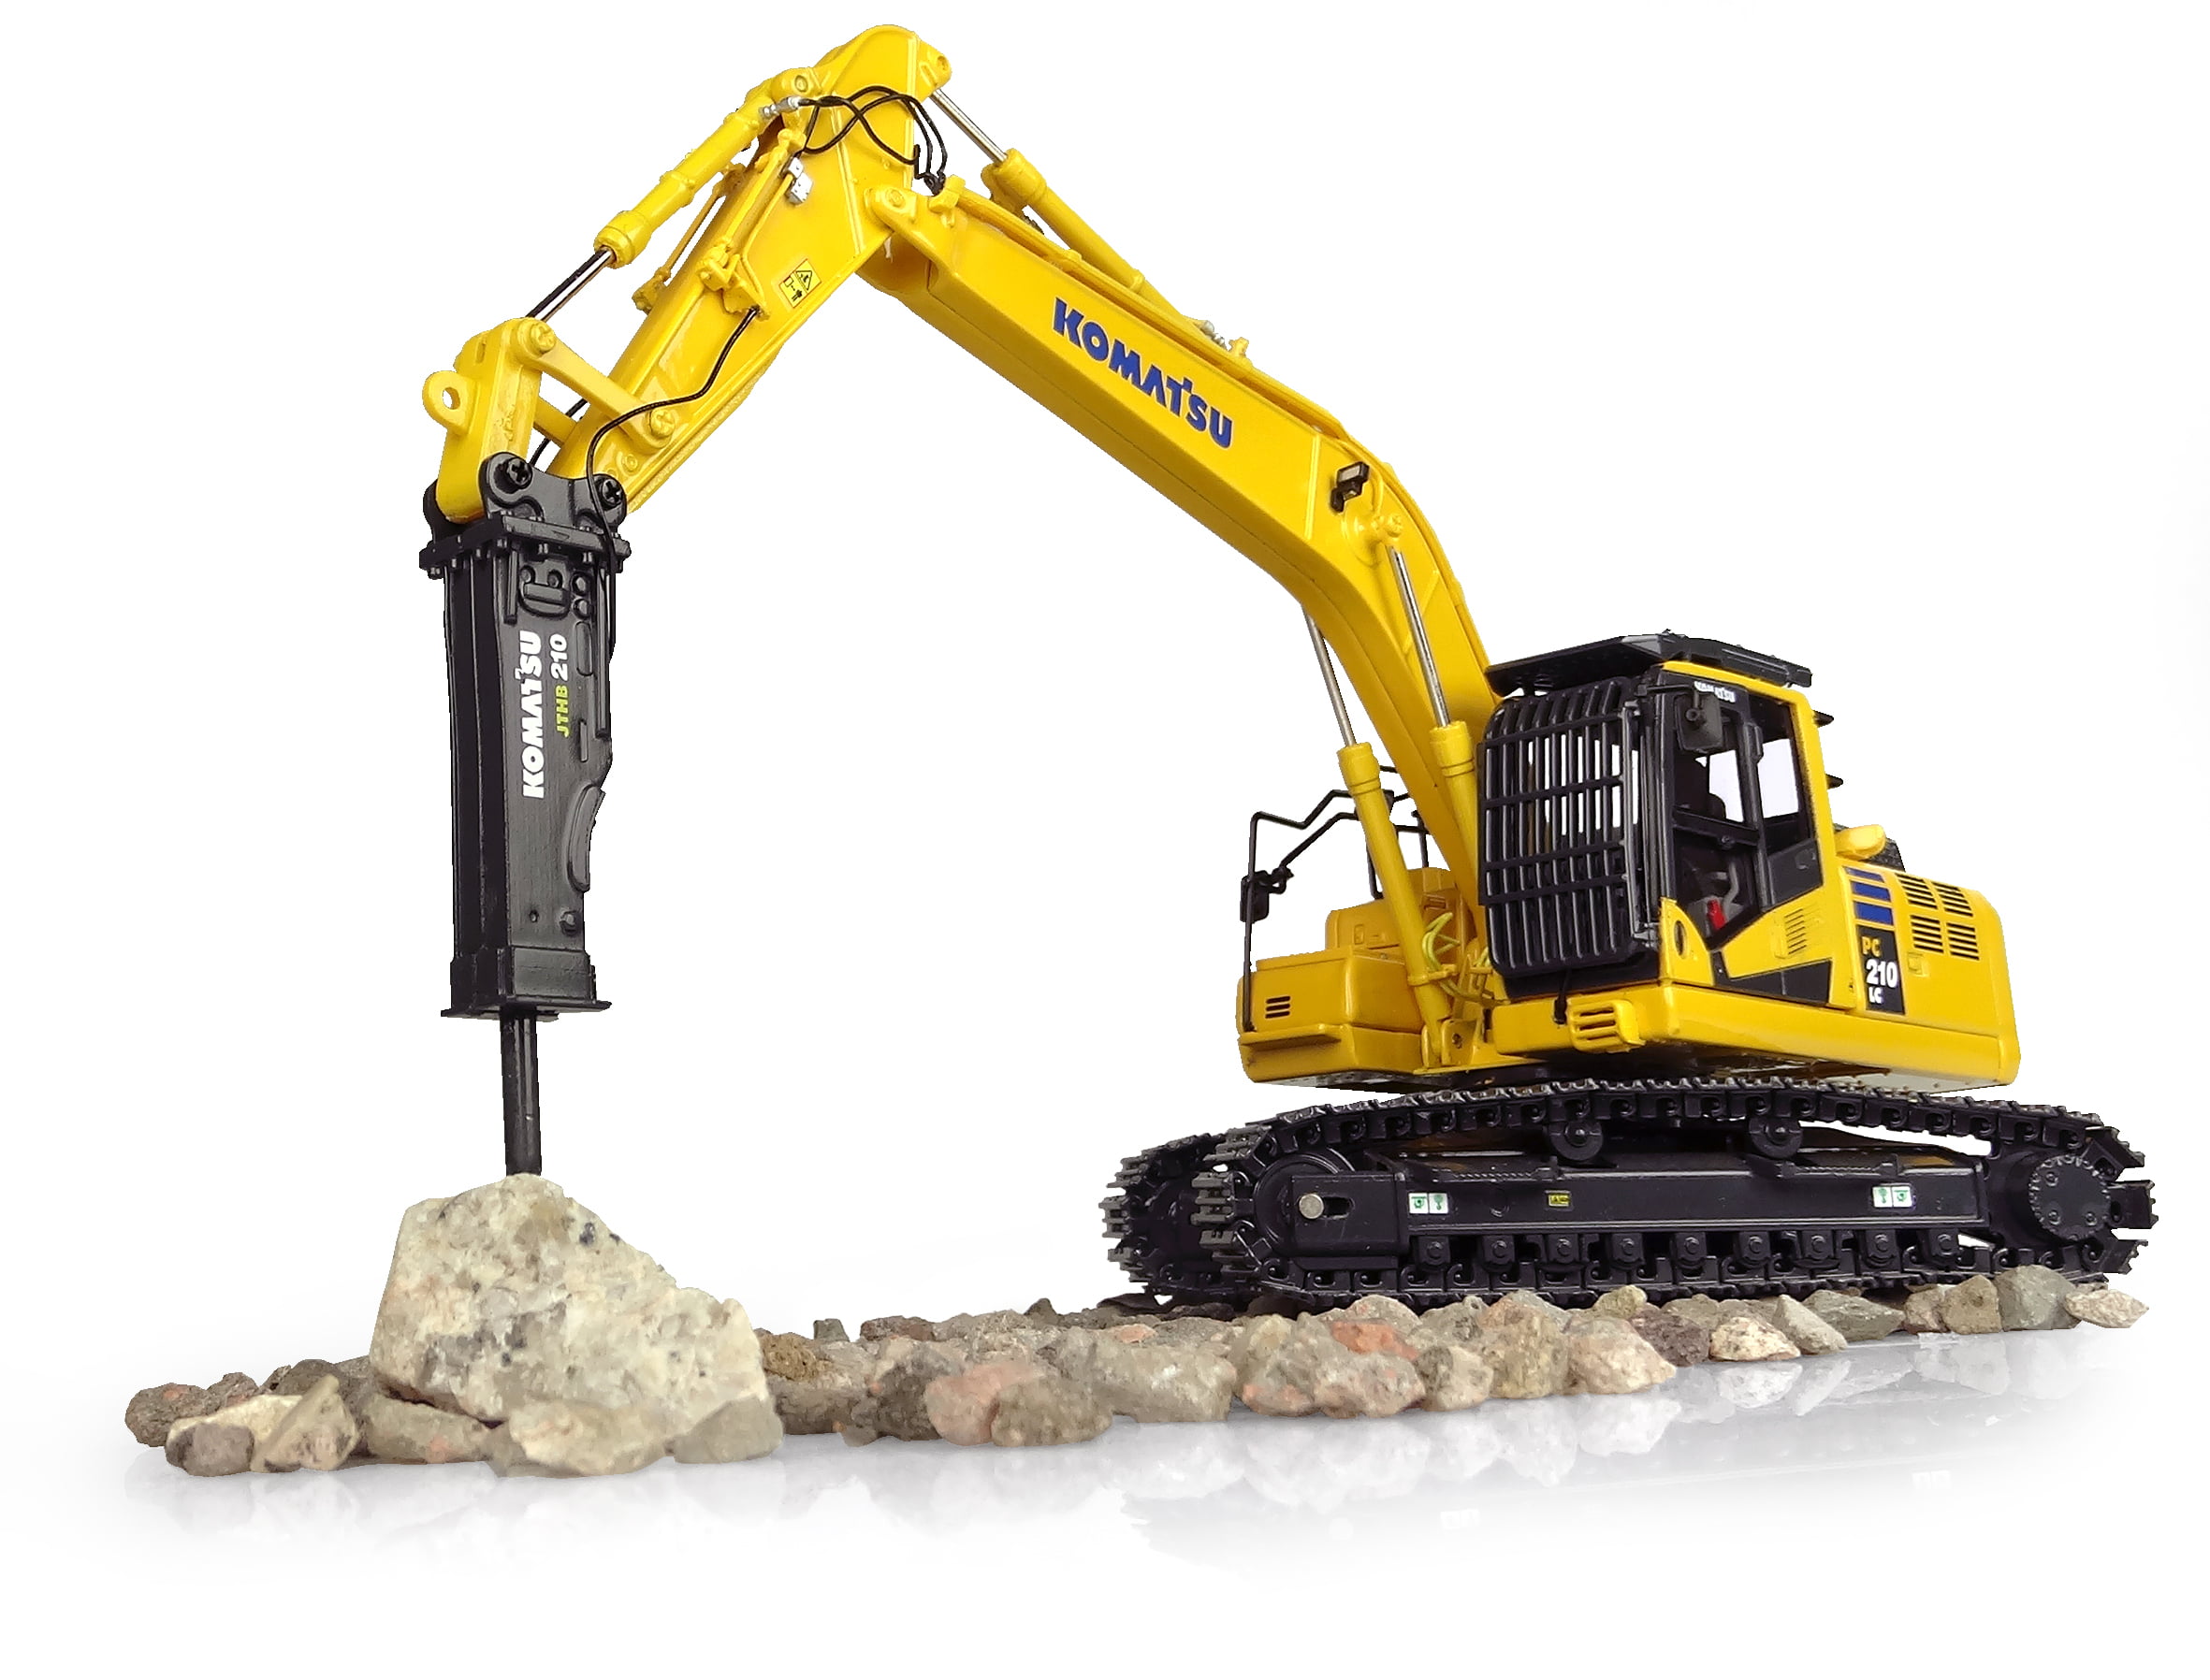 Komatsu PC210LC-11 With Hammer Drill Universal Hobbies 1:50 Scale Metal UH8140